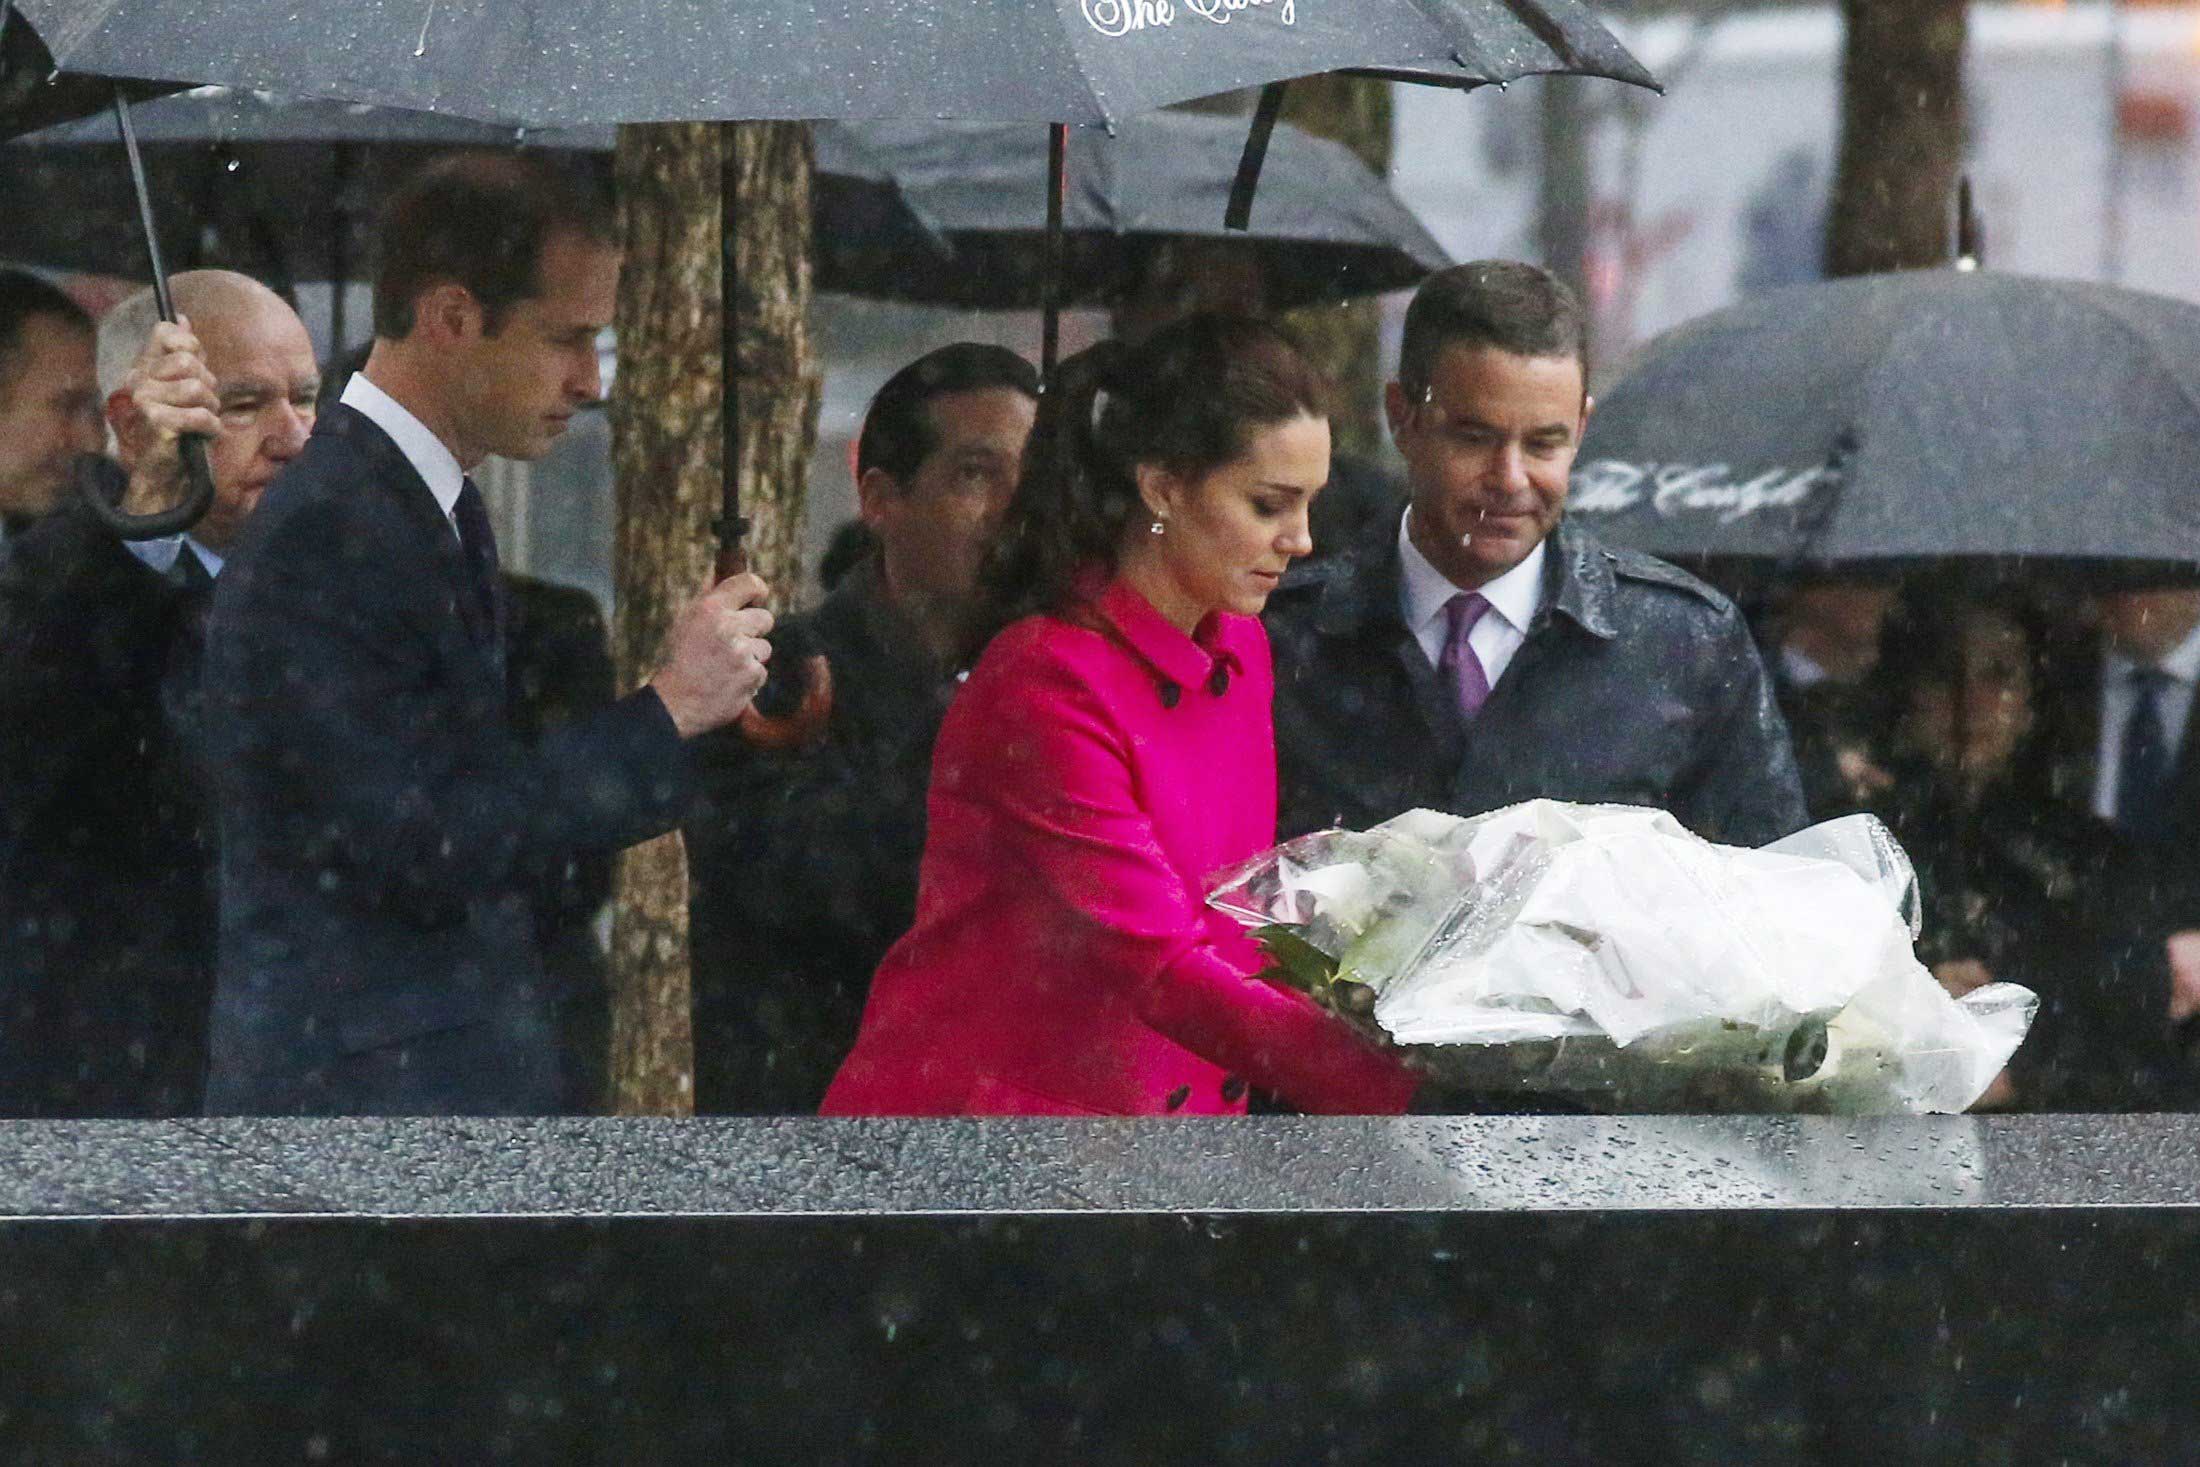 The Duchess Of Cambridge (C) lays a wreath for 9/11 victims next to the Duke of Cambridge while the royal couple pause for reflection in the Memorial Plaza at ground zero in New York City on December 9, 2014. (Eduardo Munoz Alvarez—AFP/Getty Images)